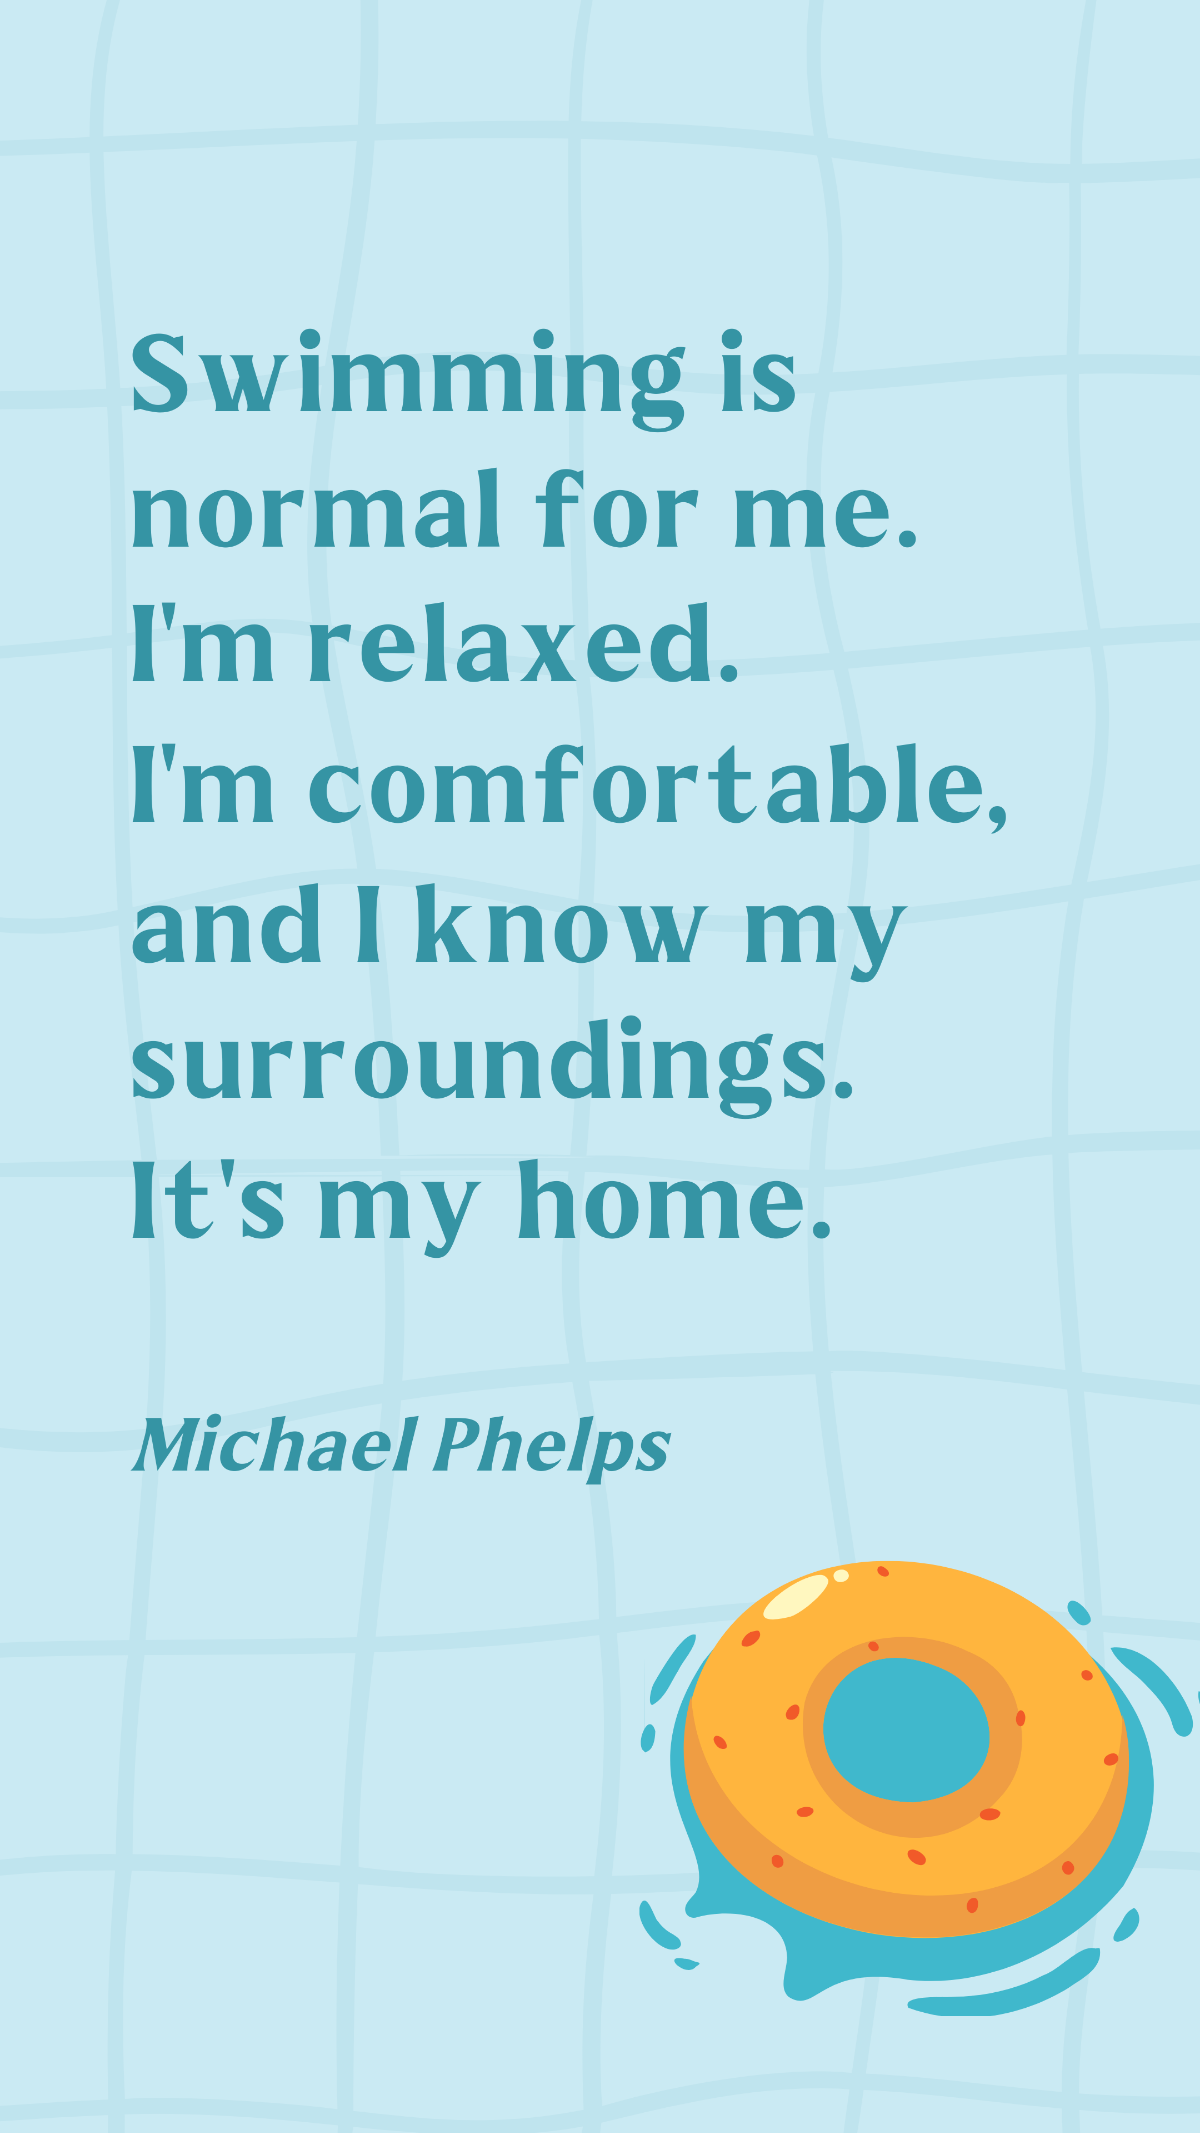 Free Michael Phelps - Swimming is normal for me. I'm relaxed. I'm comfortable, and I know my surroundings. It's my home. Template